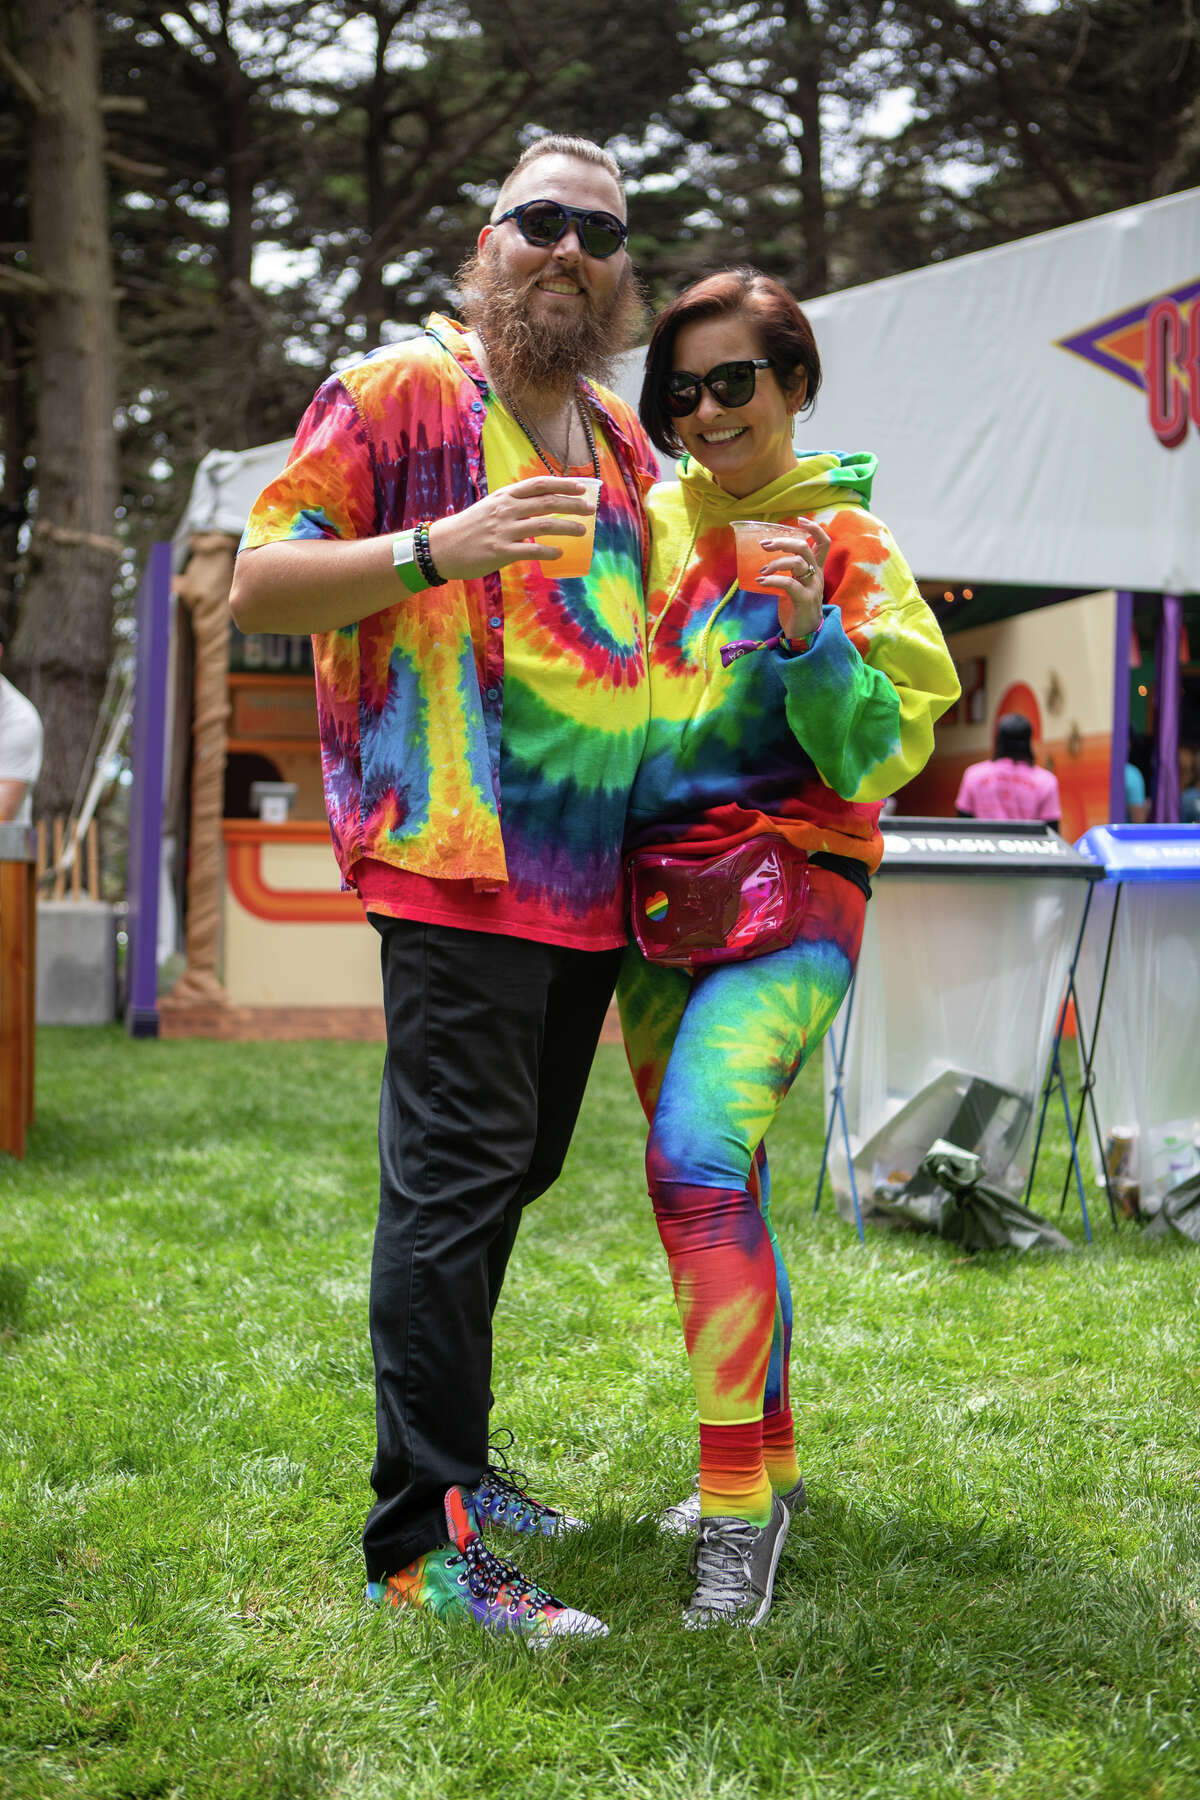 Jake Ward and Claudine Bibeau are seen in colorful outfits at the Golden Gate Park Outlands on August 5, 2022 in San Francisco, California.